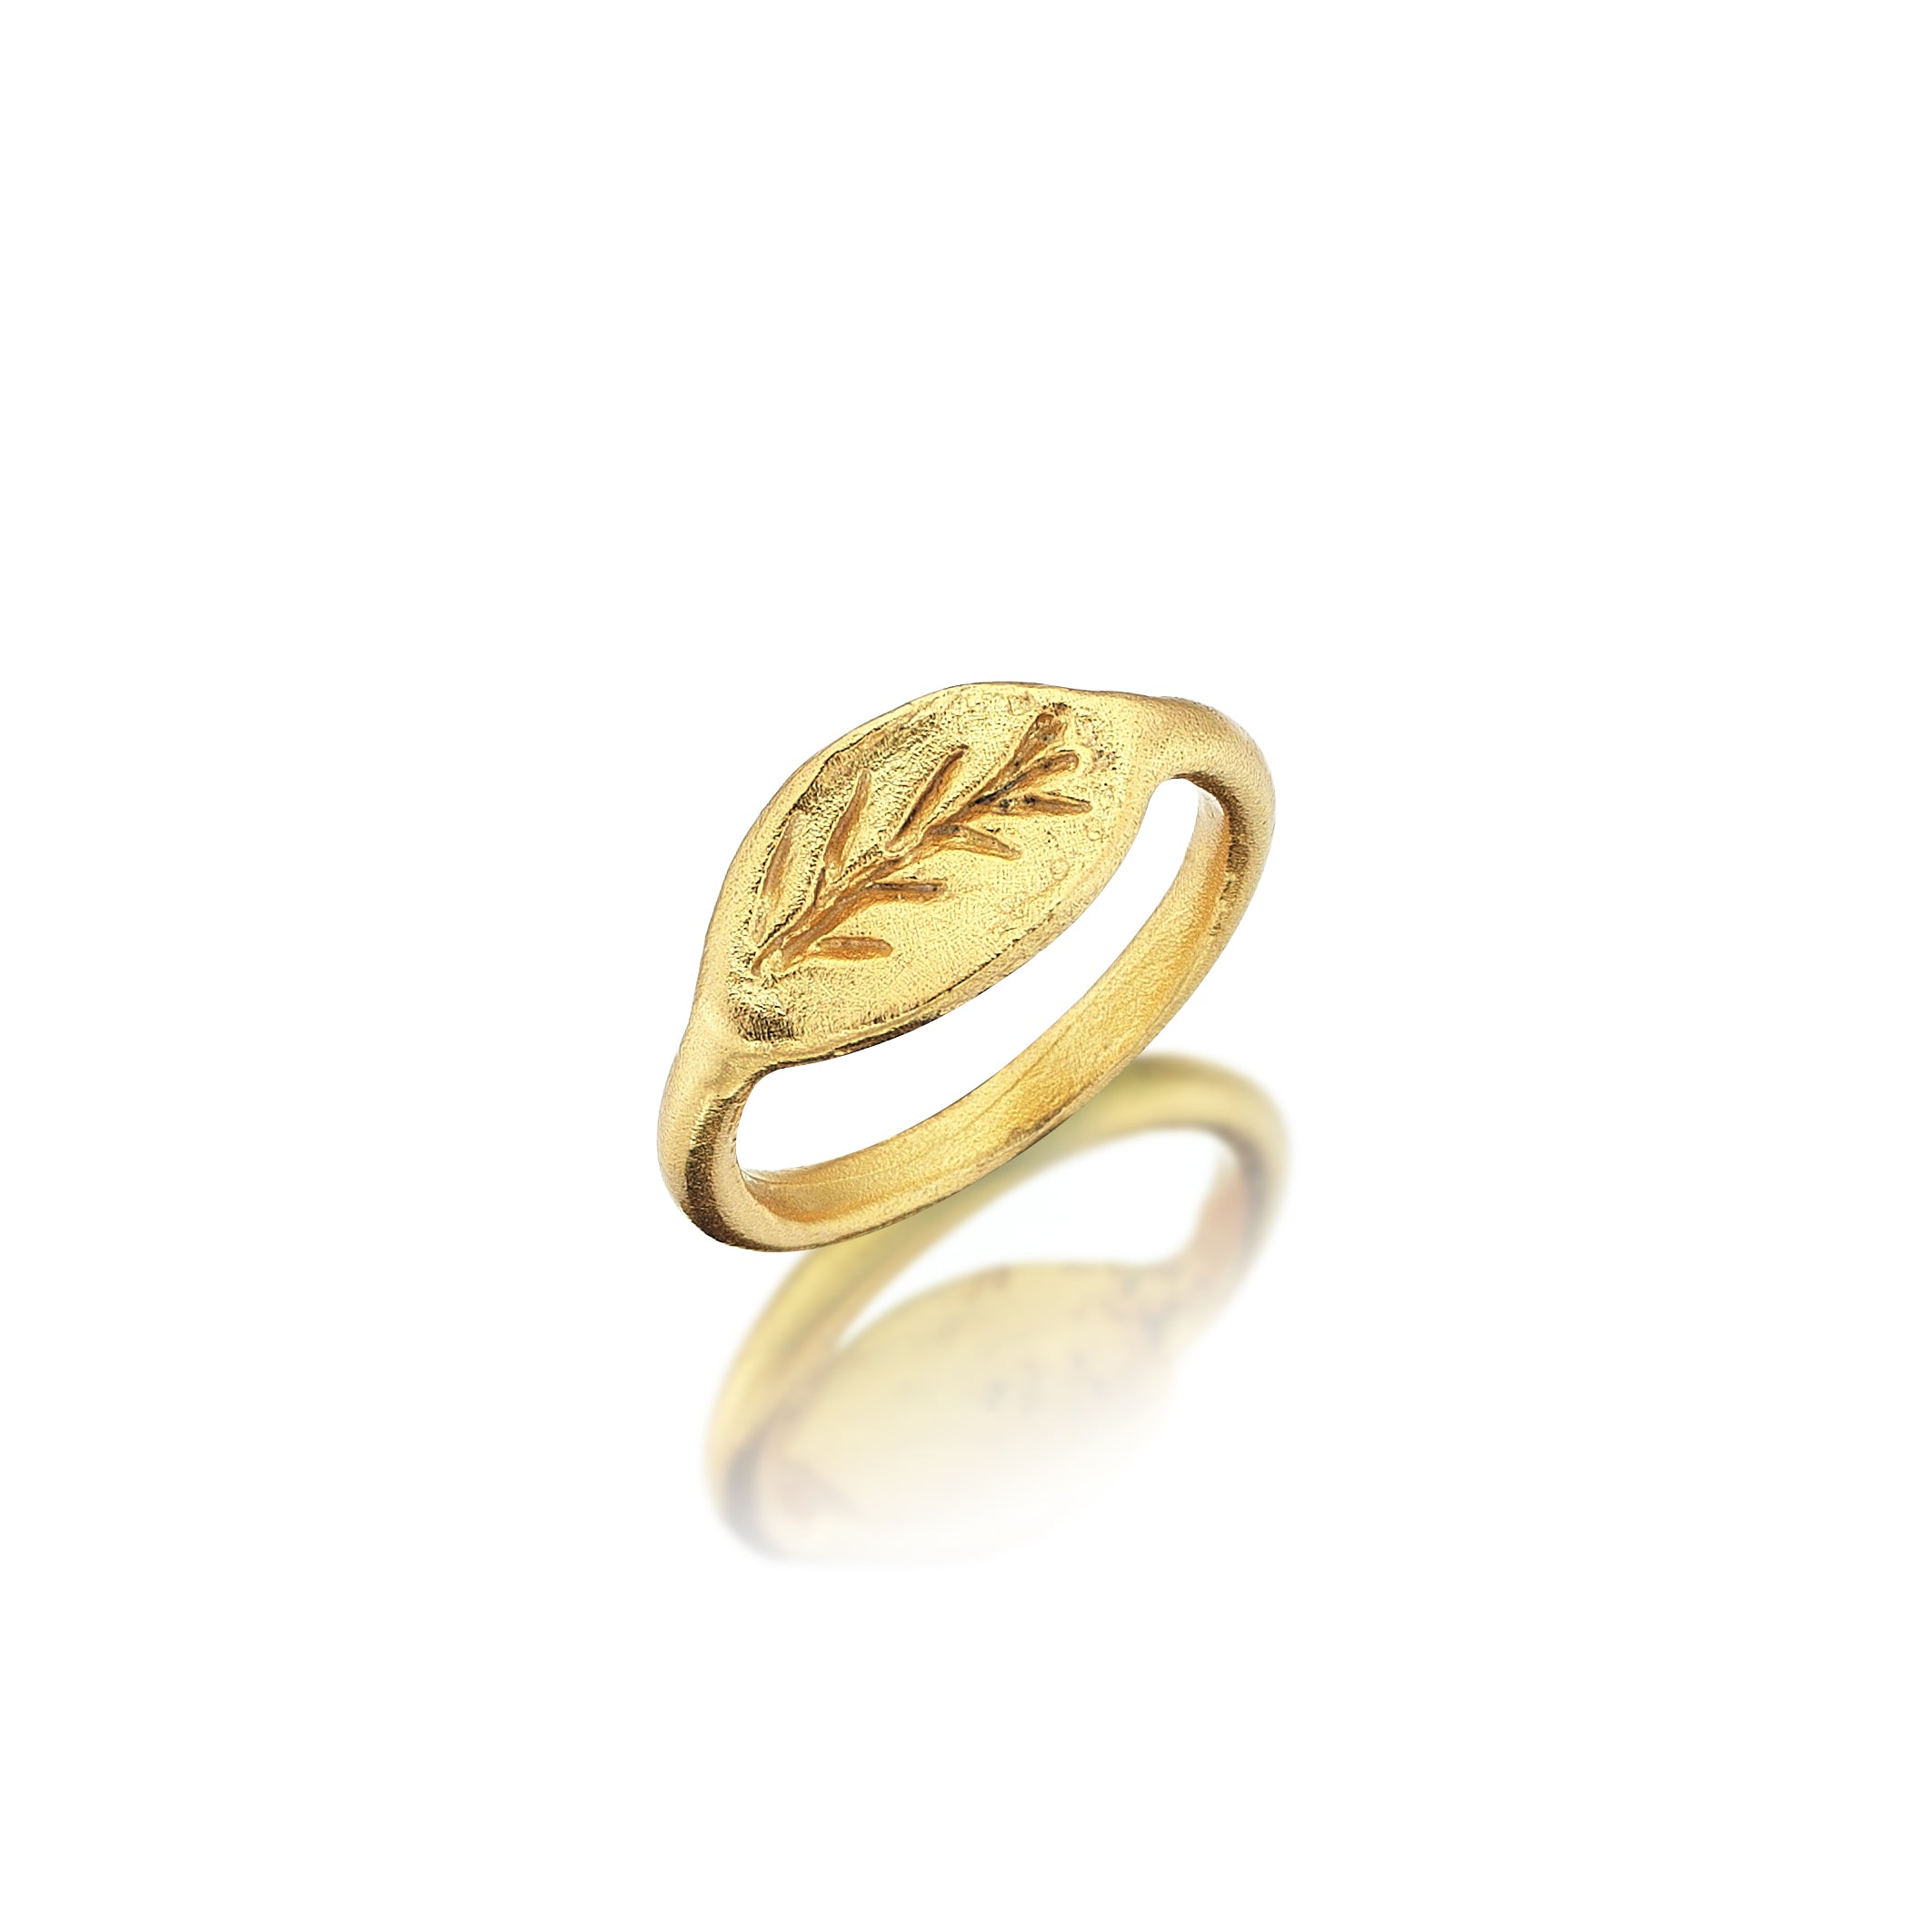 THE OLIVE BRANCH RING